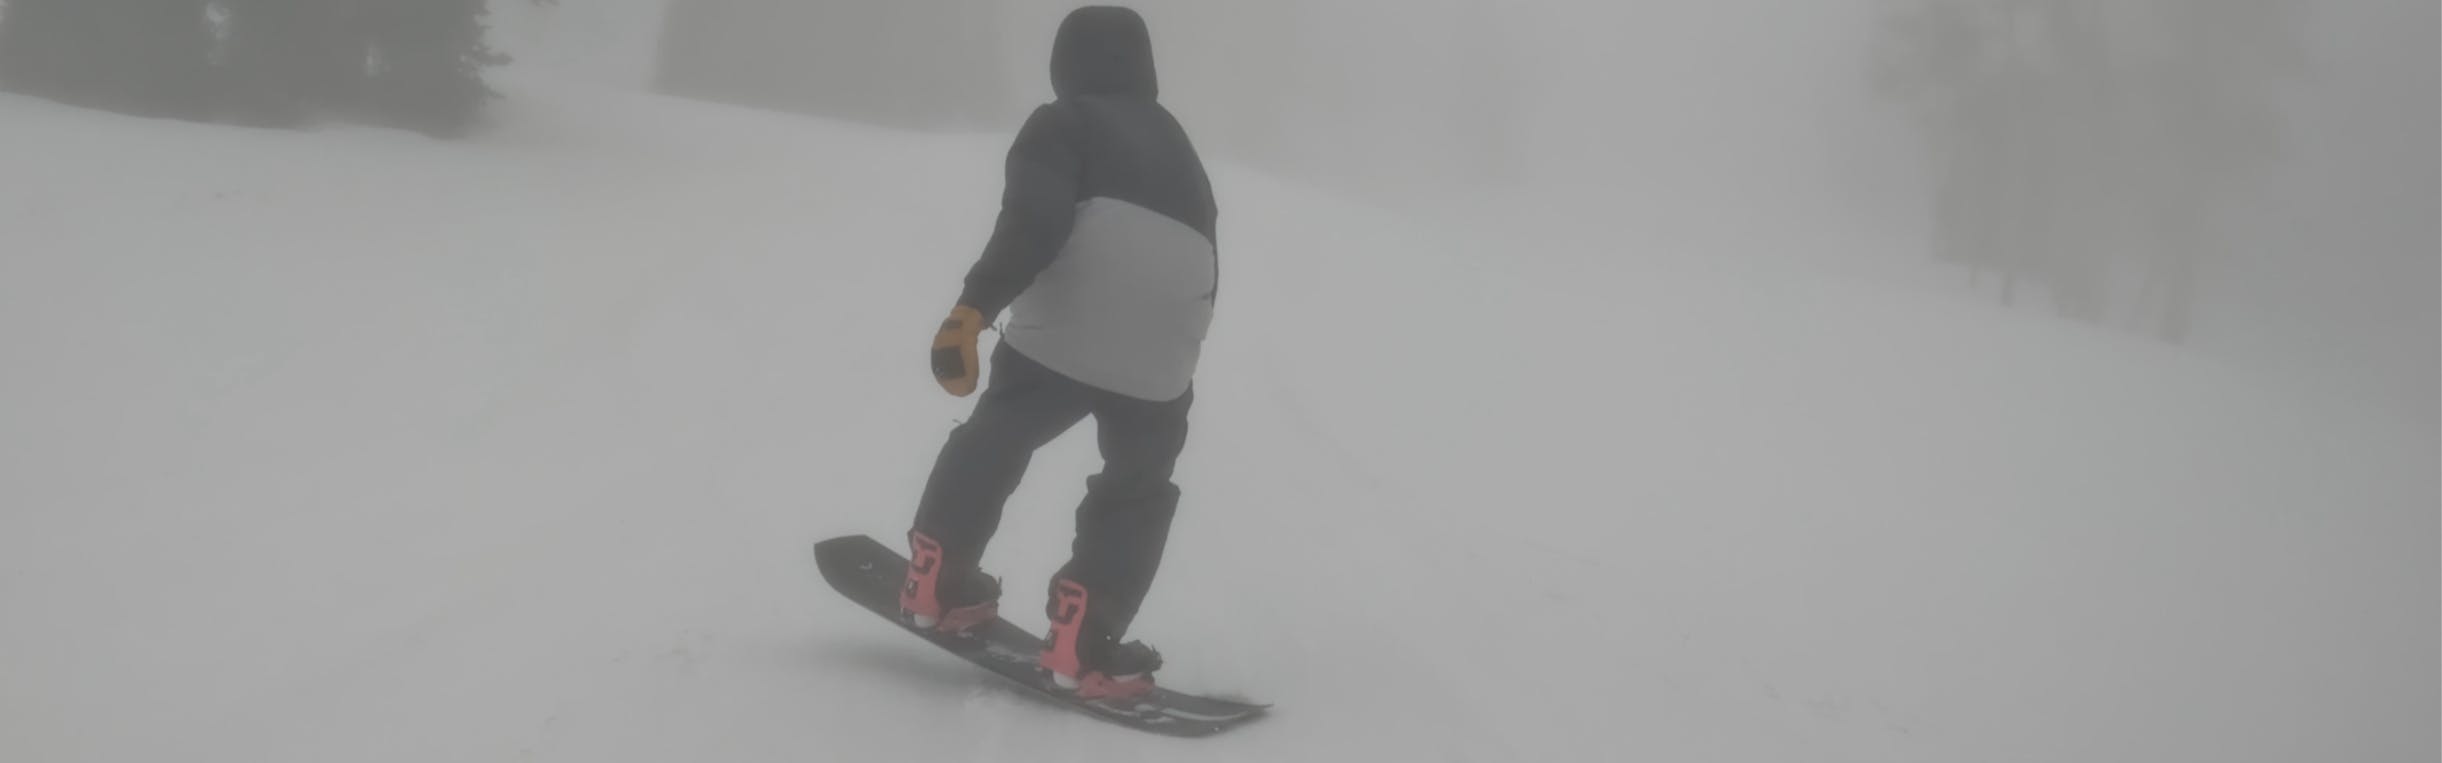 A snowboarder on the  2023 Ride Superpig Snowboard.